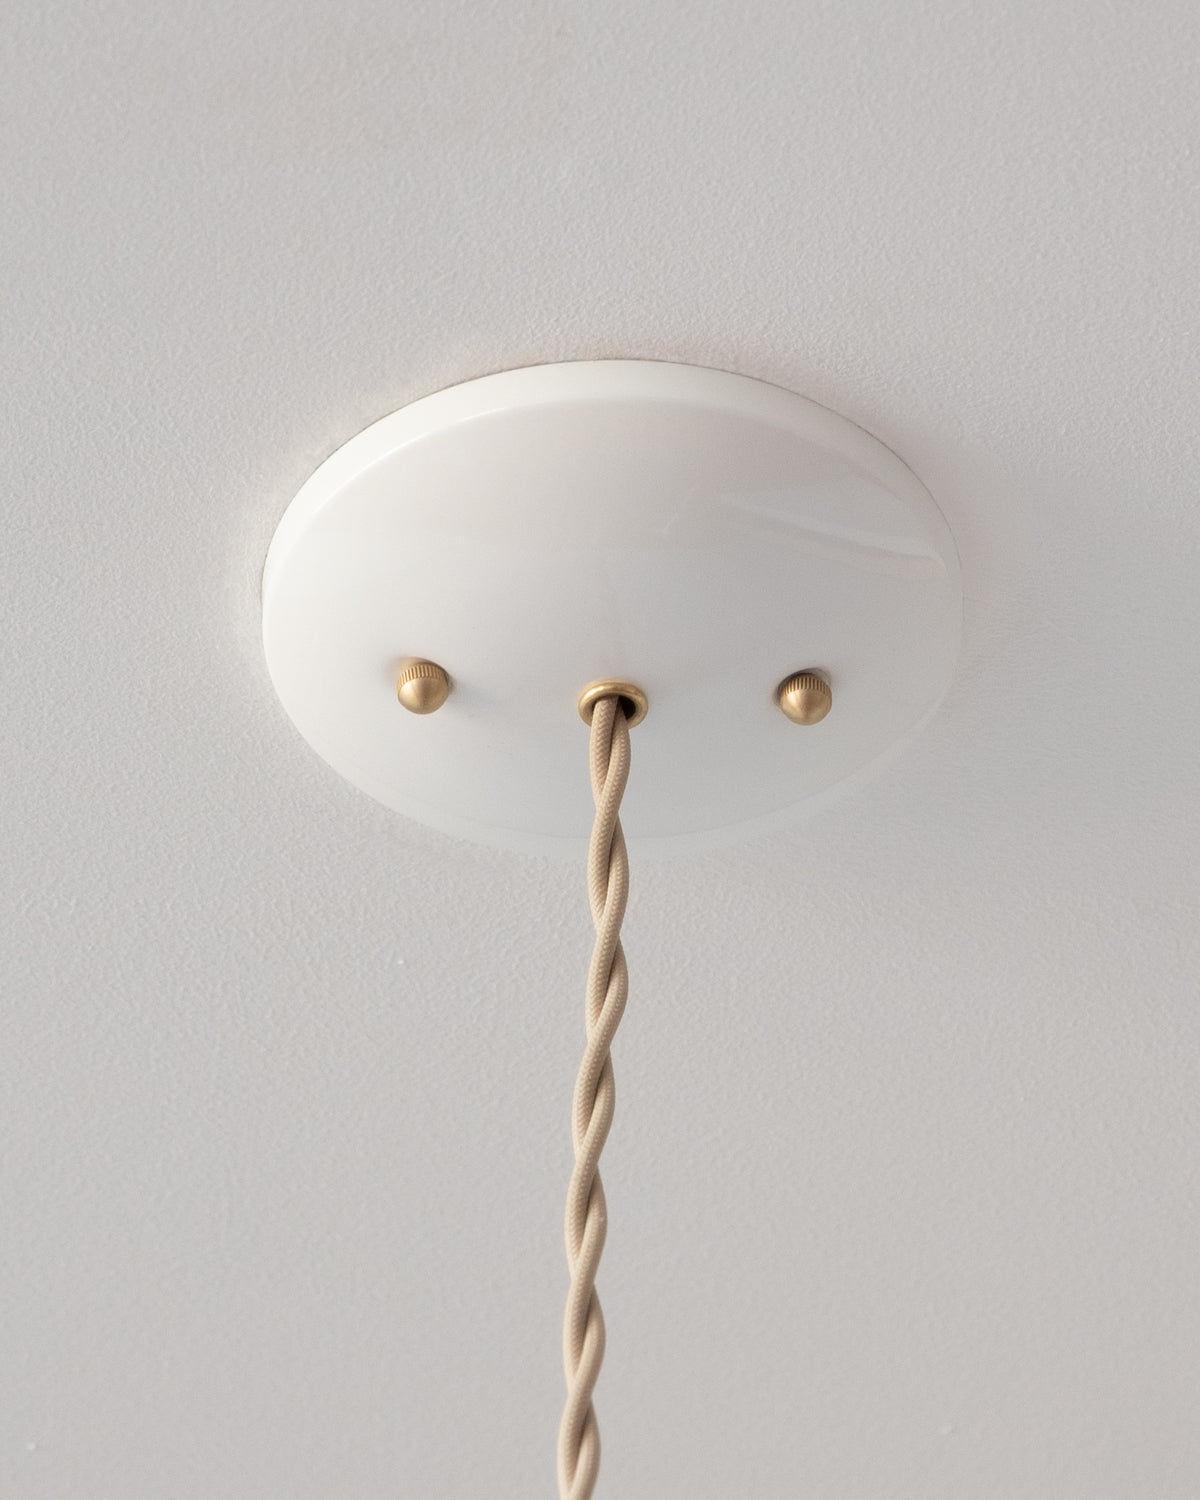 Glossy white canopy for Charming leather pendant light with white handstitched shade and brass accents